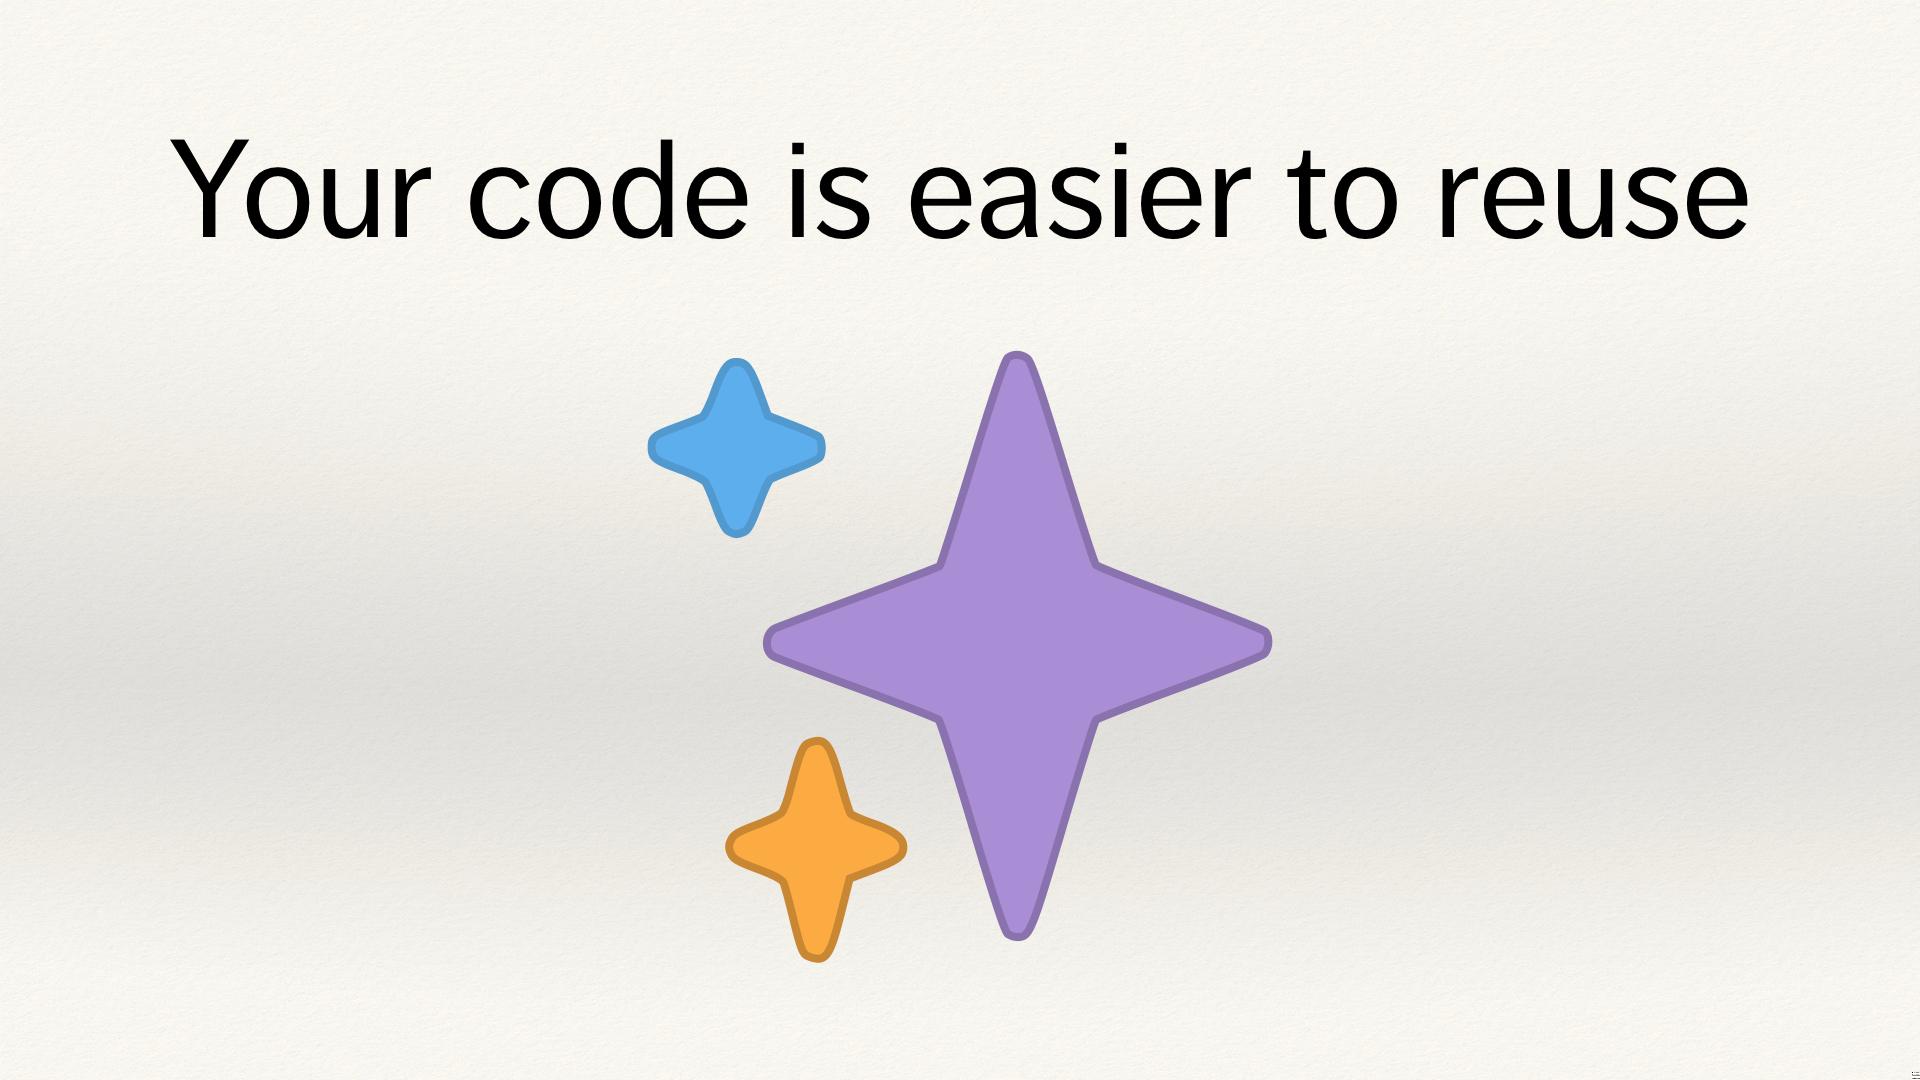 Emoji sparkles, below the text “Your code is easier to reuse”.